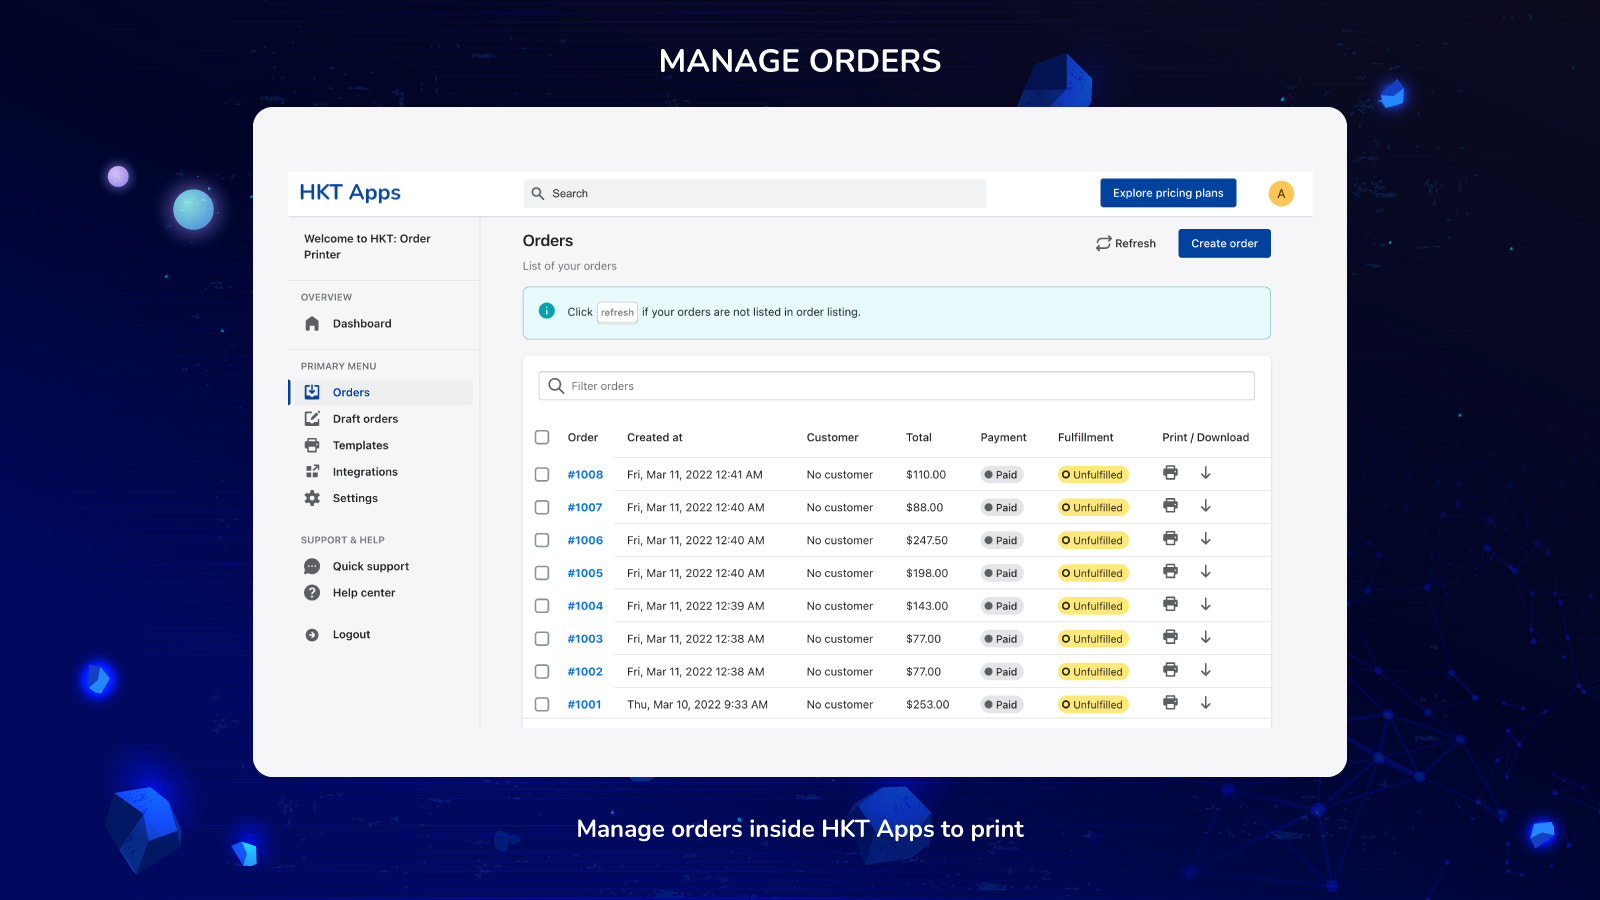 Manage orders in HKT Apps to print